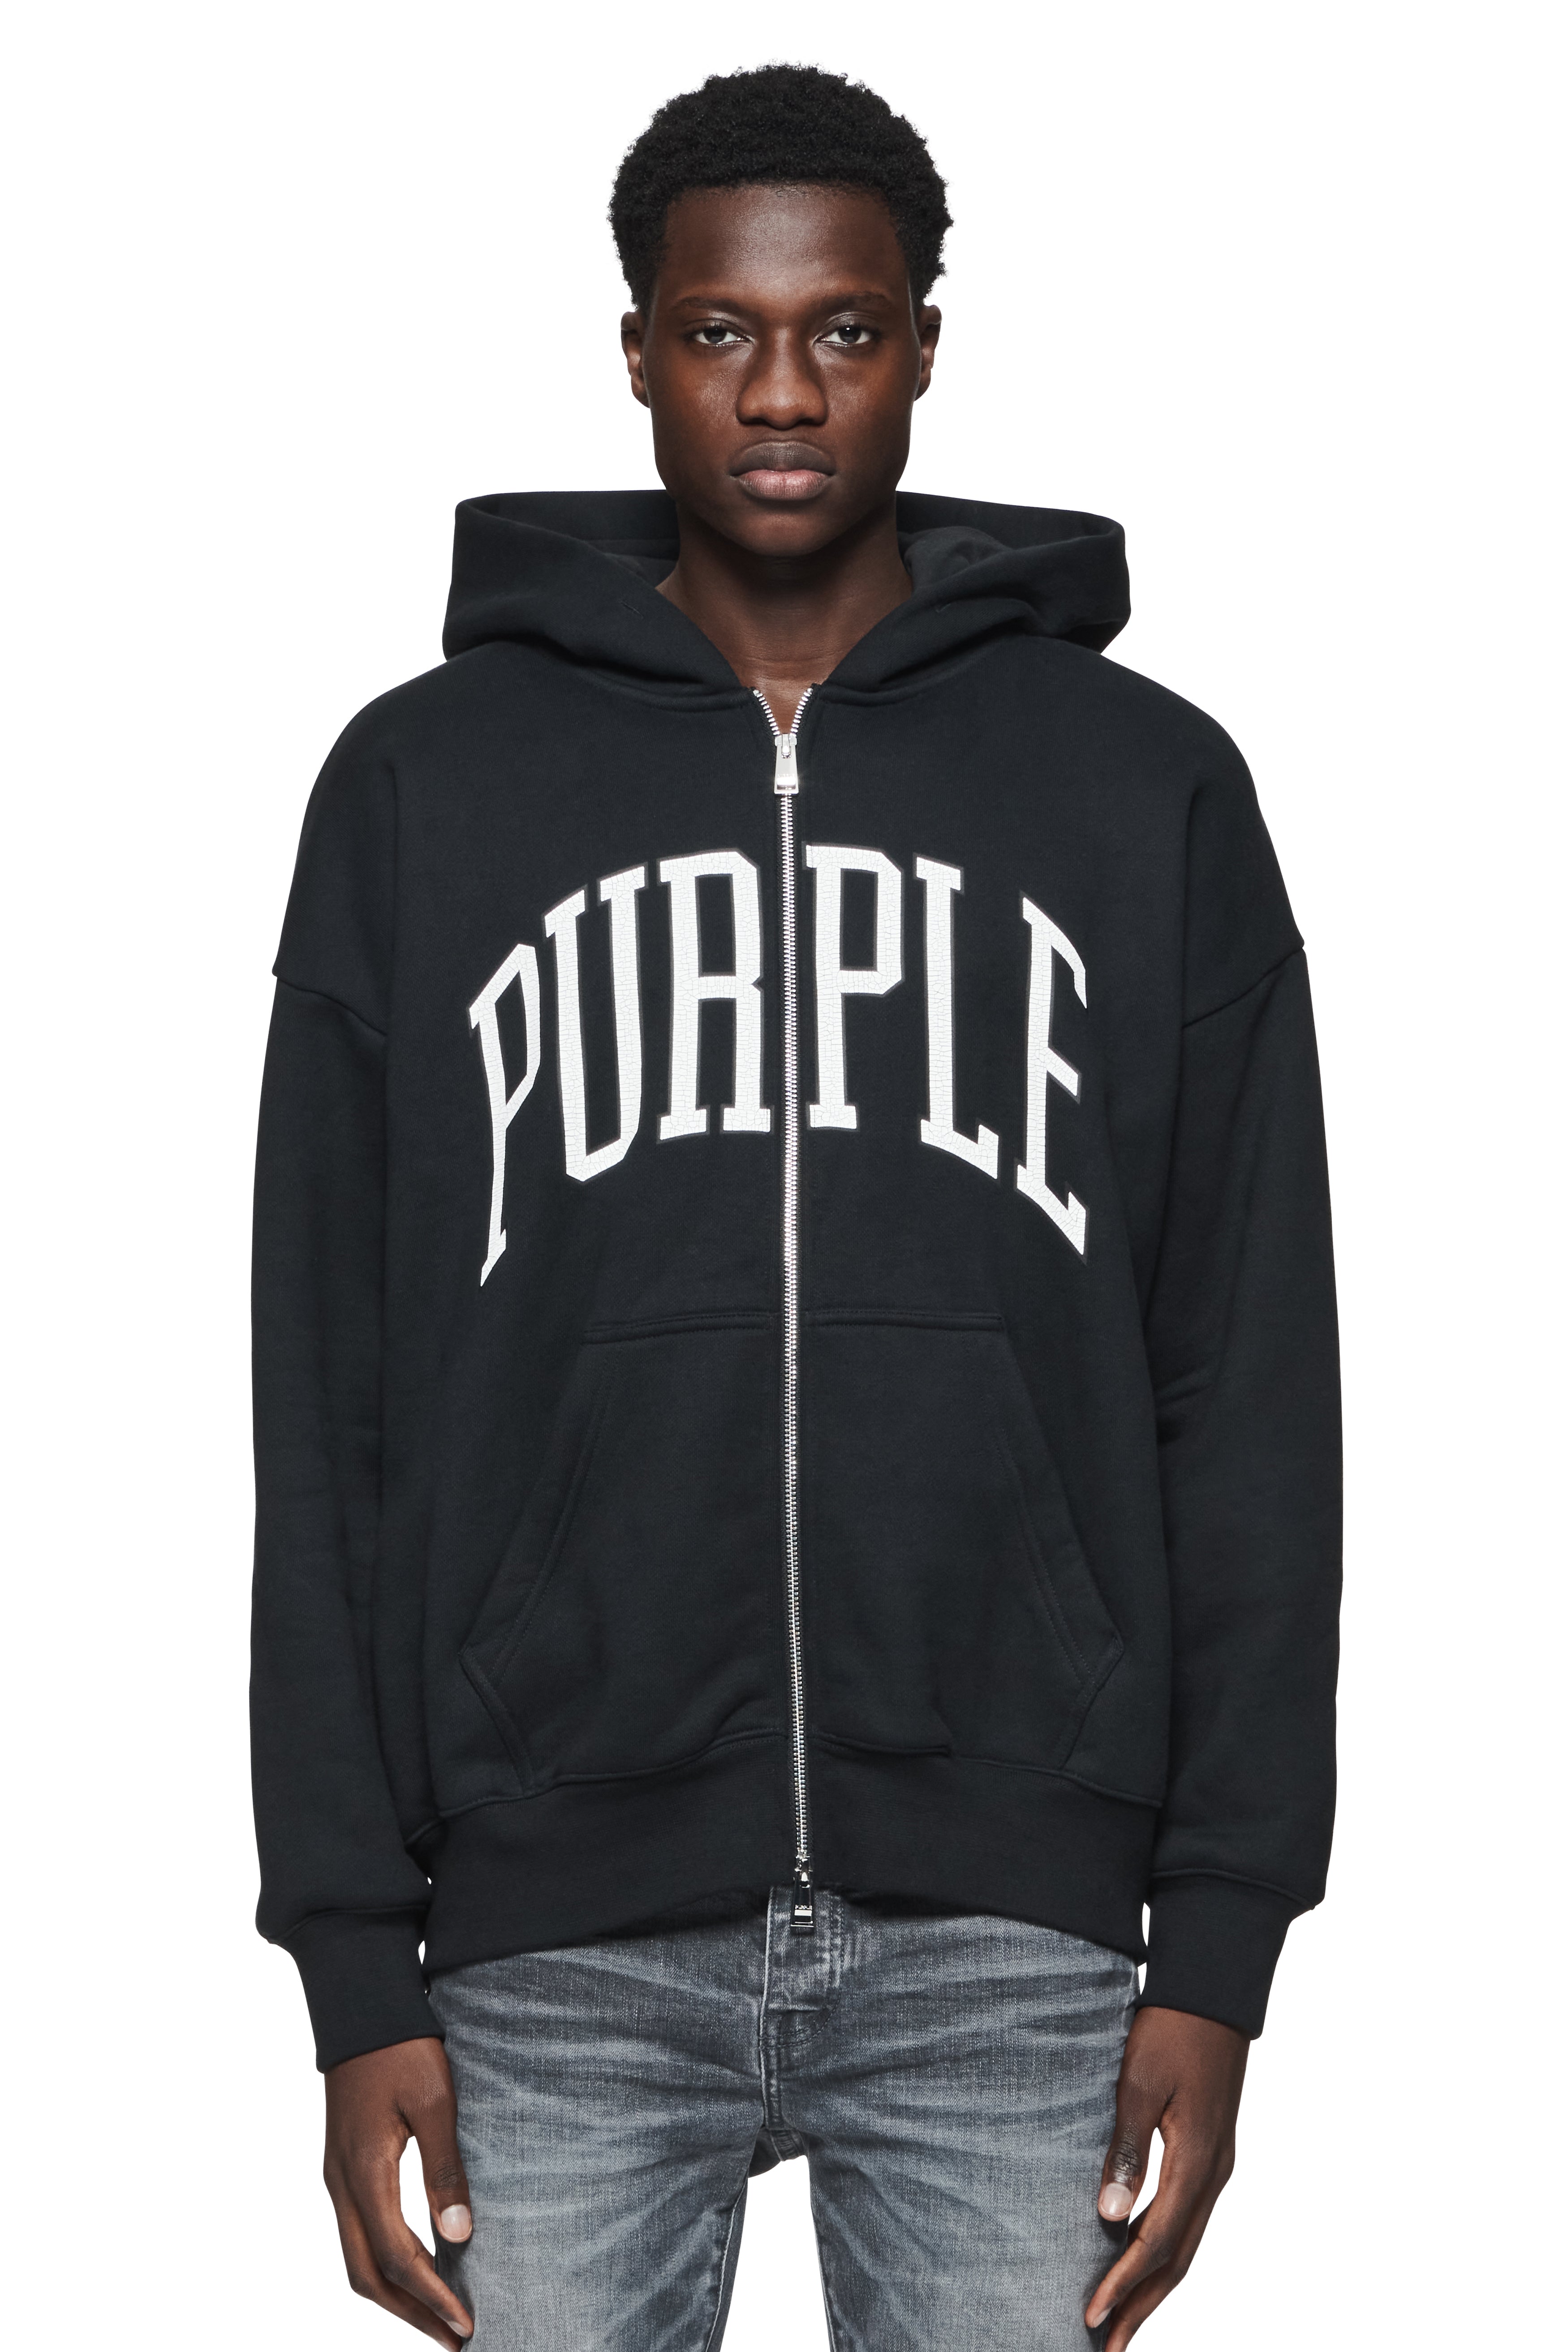 Brand New Kodone Purple Hoodie (Limited Release) A/R feature Size